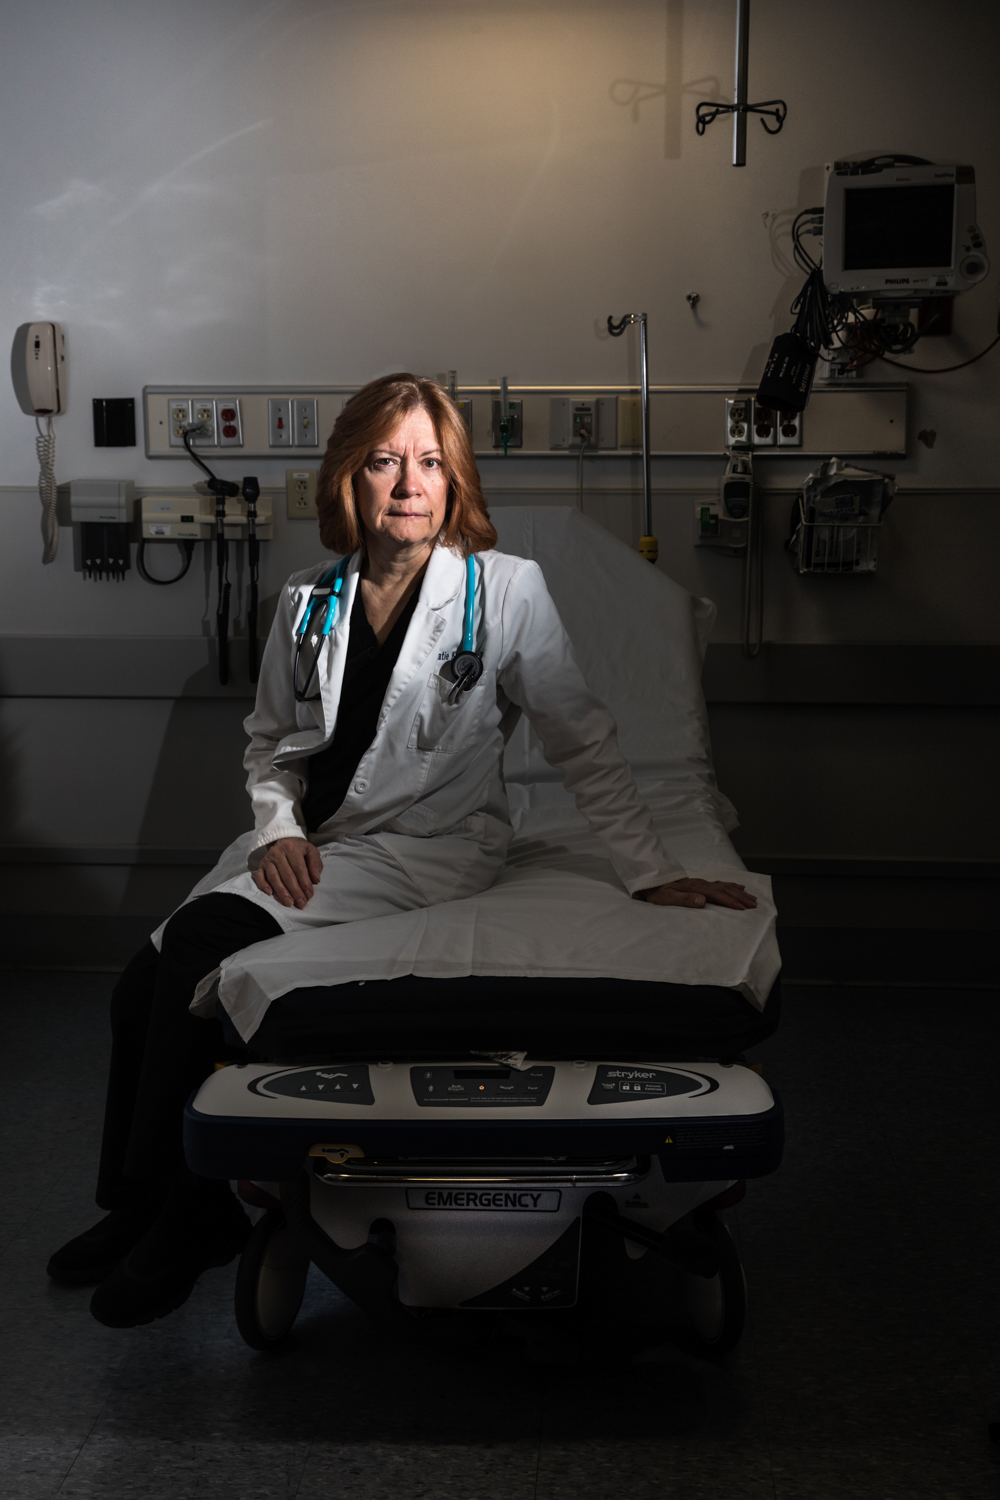 “I started medical school when I was fifty years old. It was something I had wanted to do since I was four years old. At forty-eight, I went back to college to take all my pre-med requirements, and I got straight A’s.” Photograph by Joan Lobis Brown.